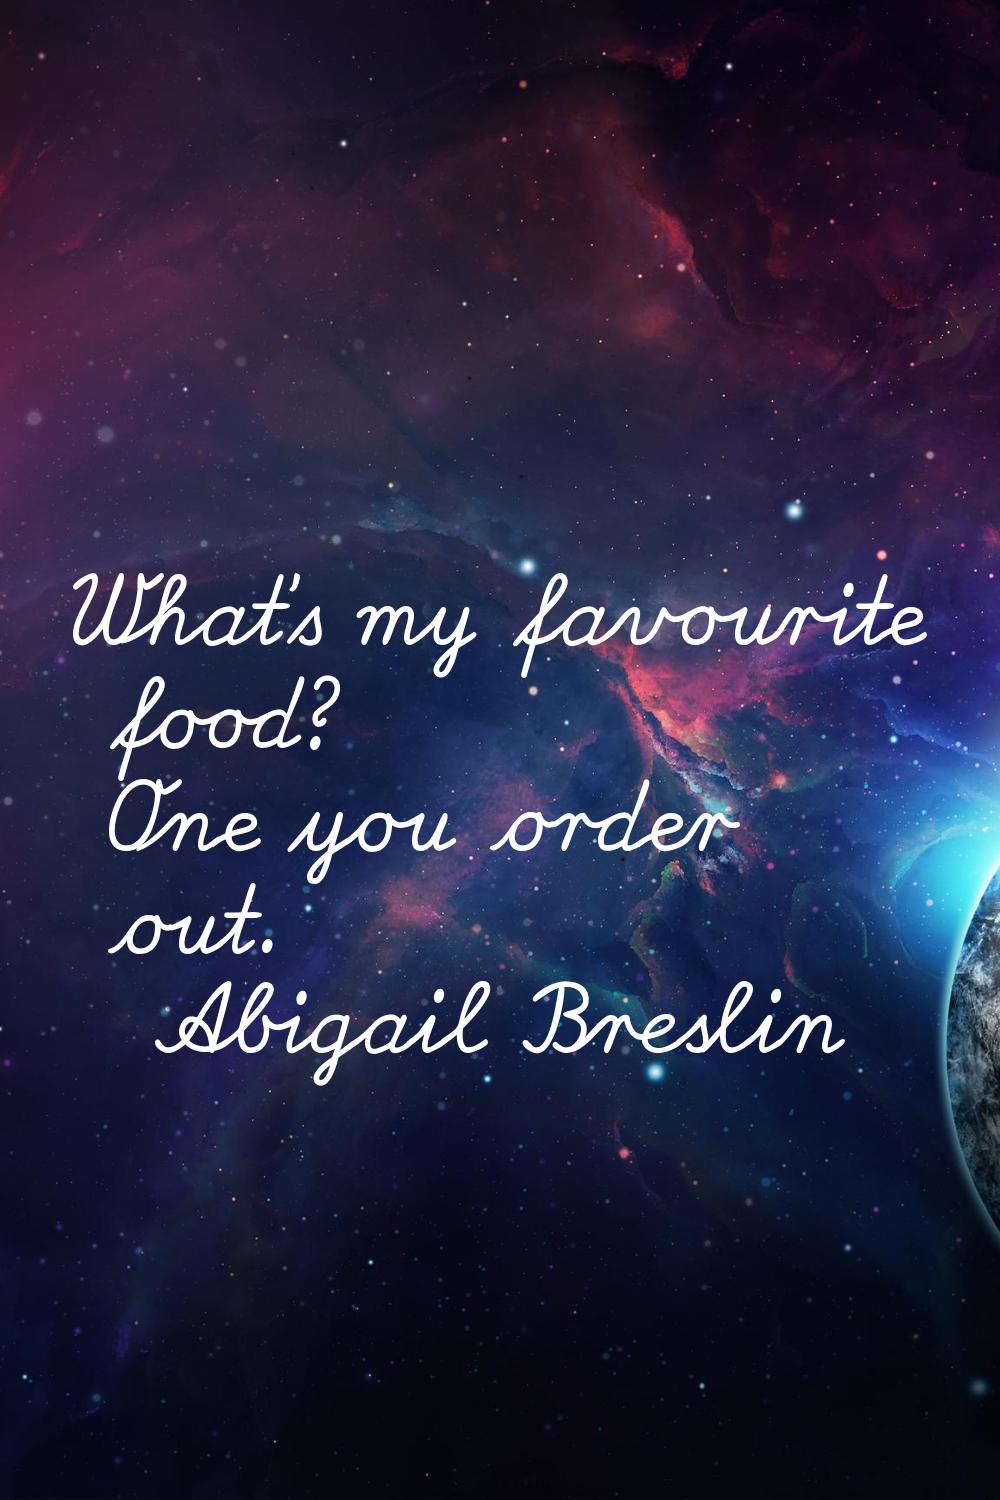 What's my favourite food? One you order out.